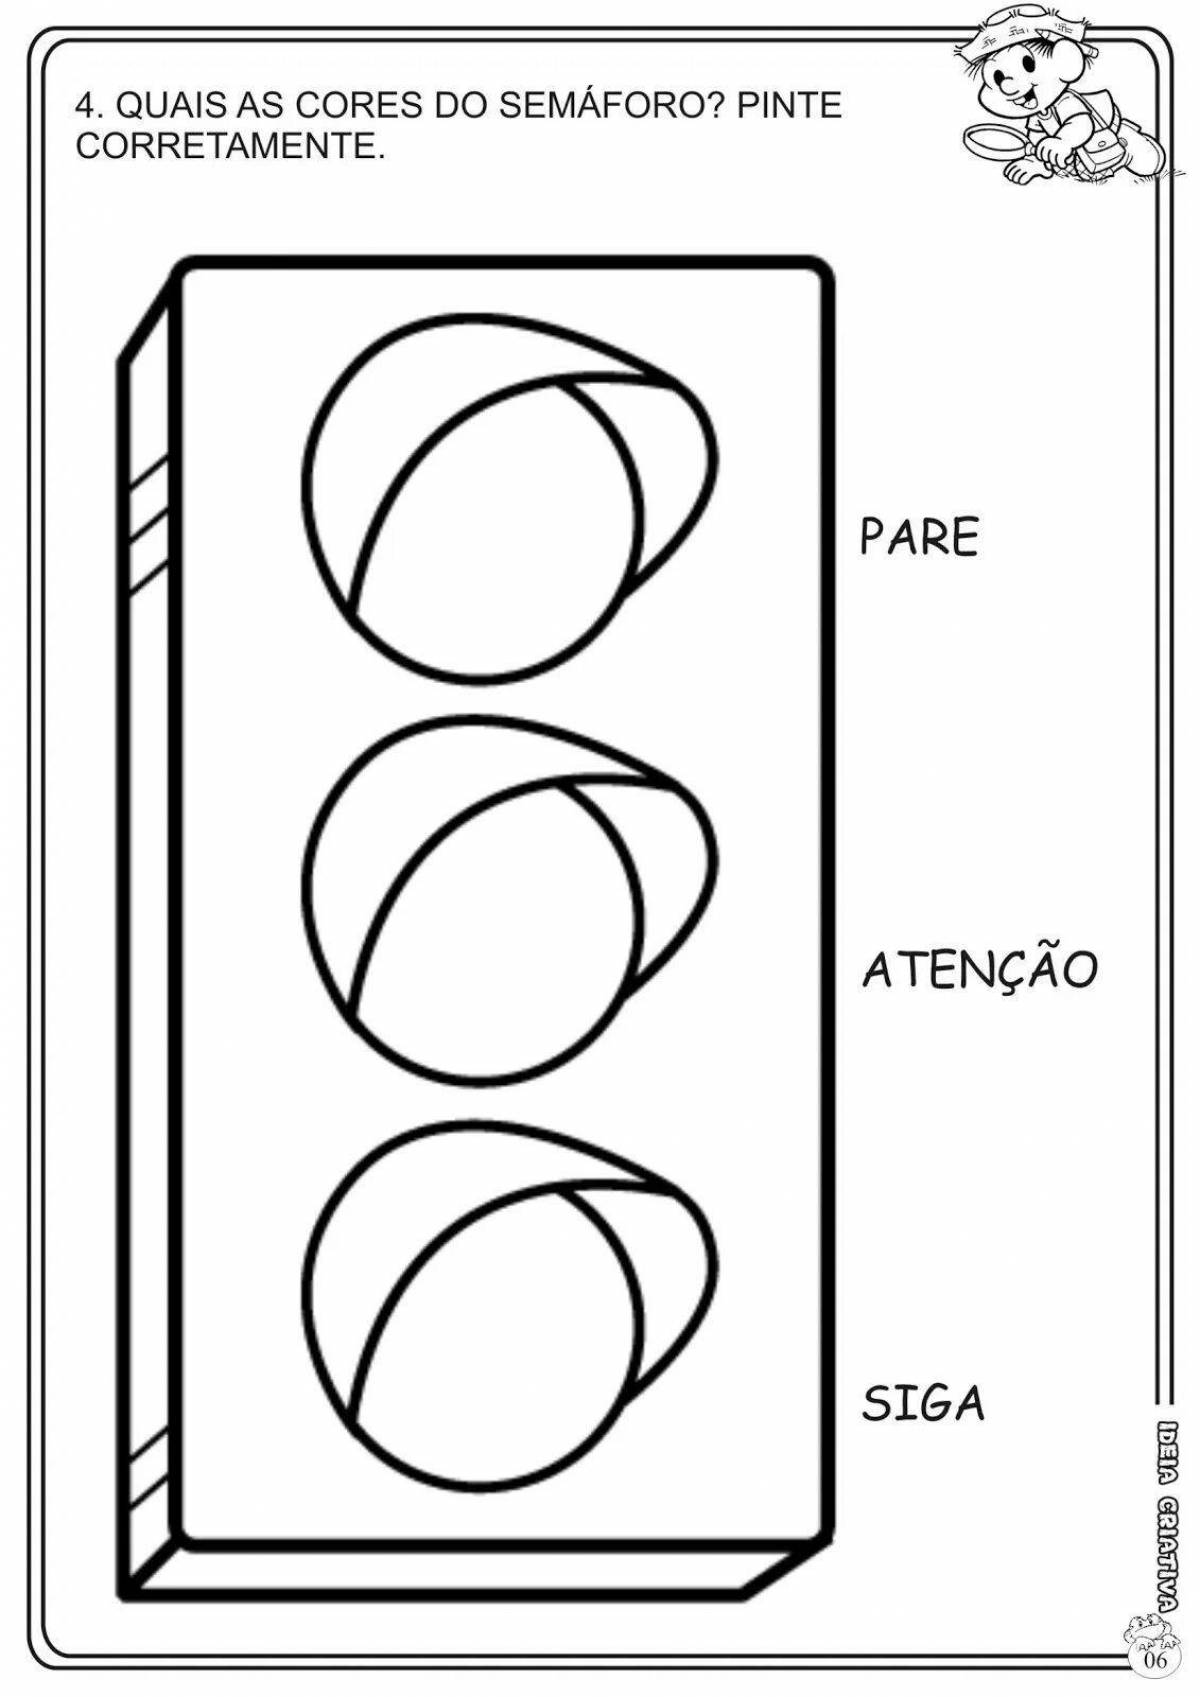 Interesting traffic light coloring page for kids